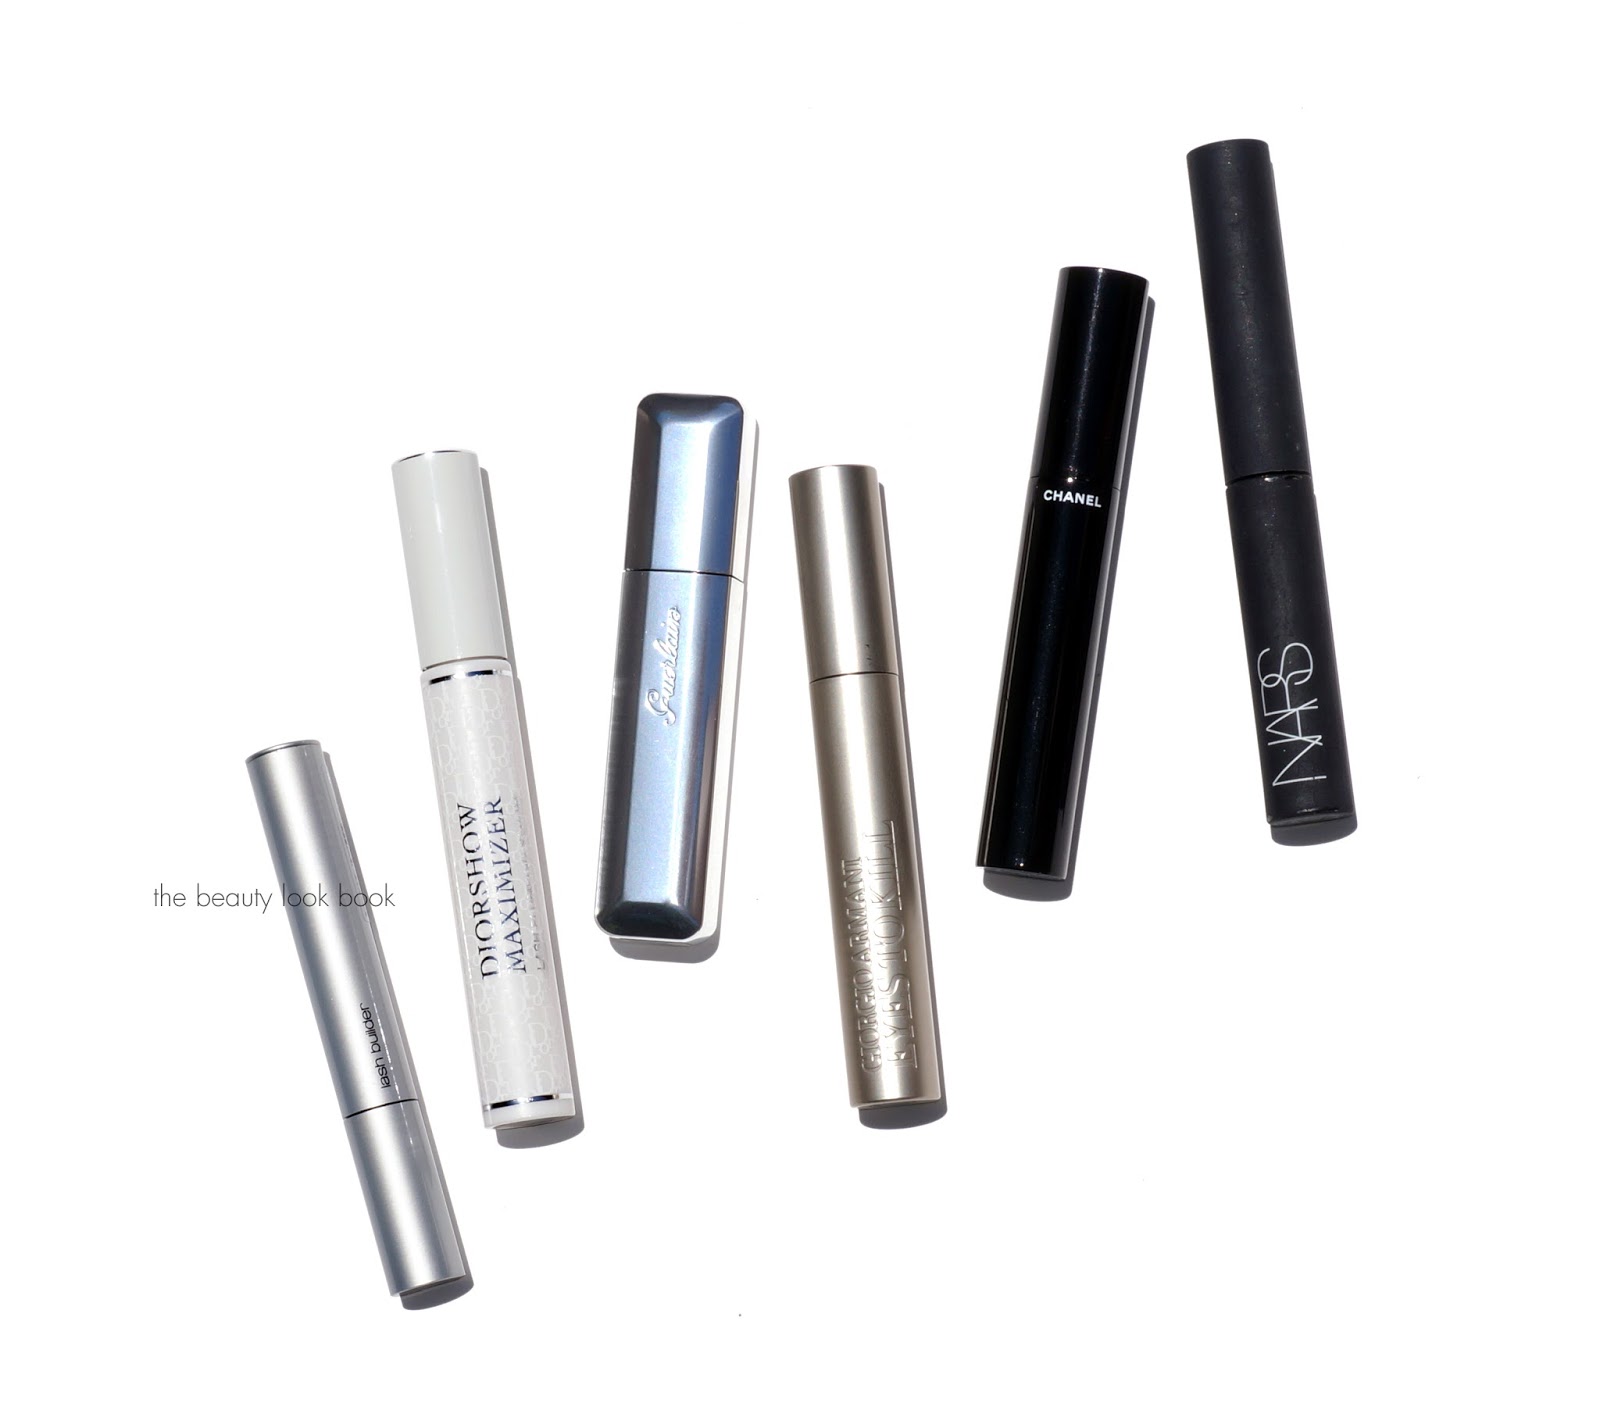 In Rotation Beauty Look Book Mascara and Picks The Beauty Look Book